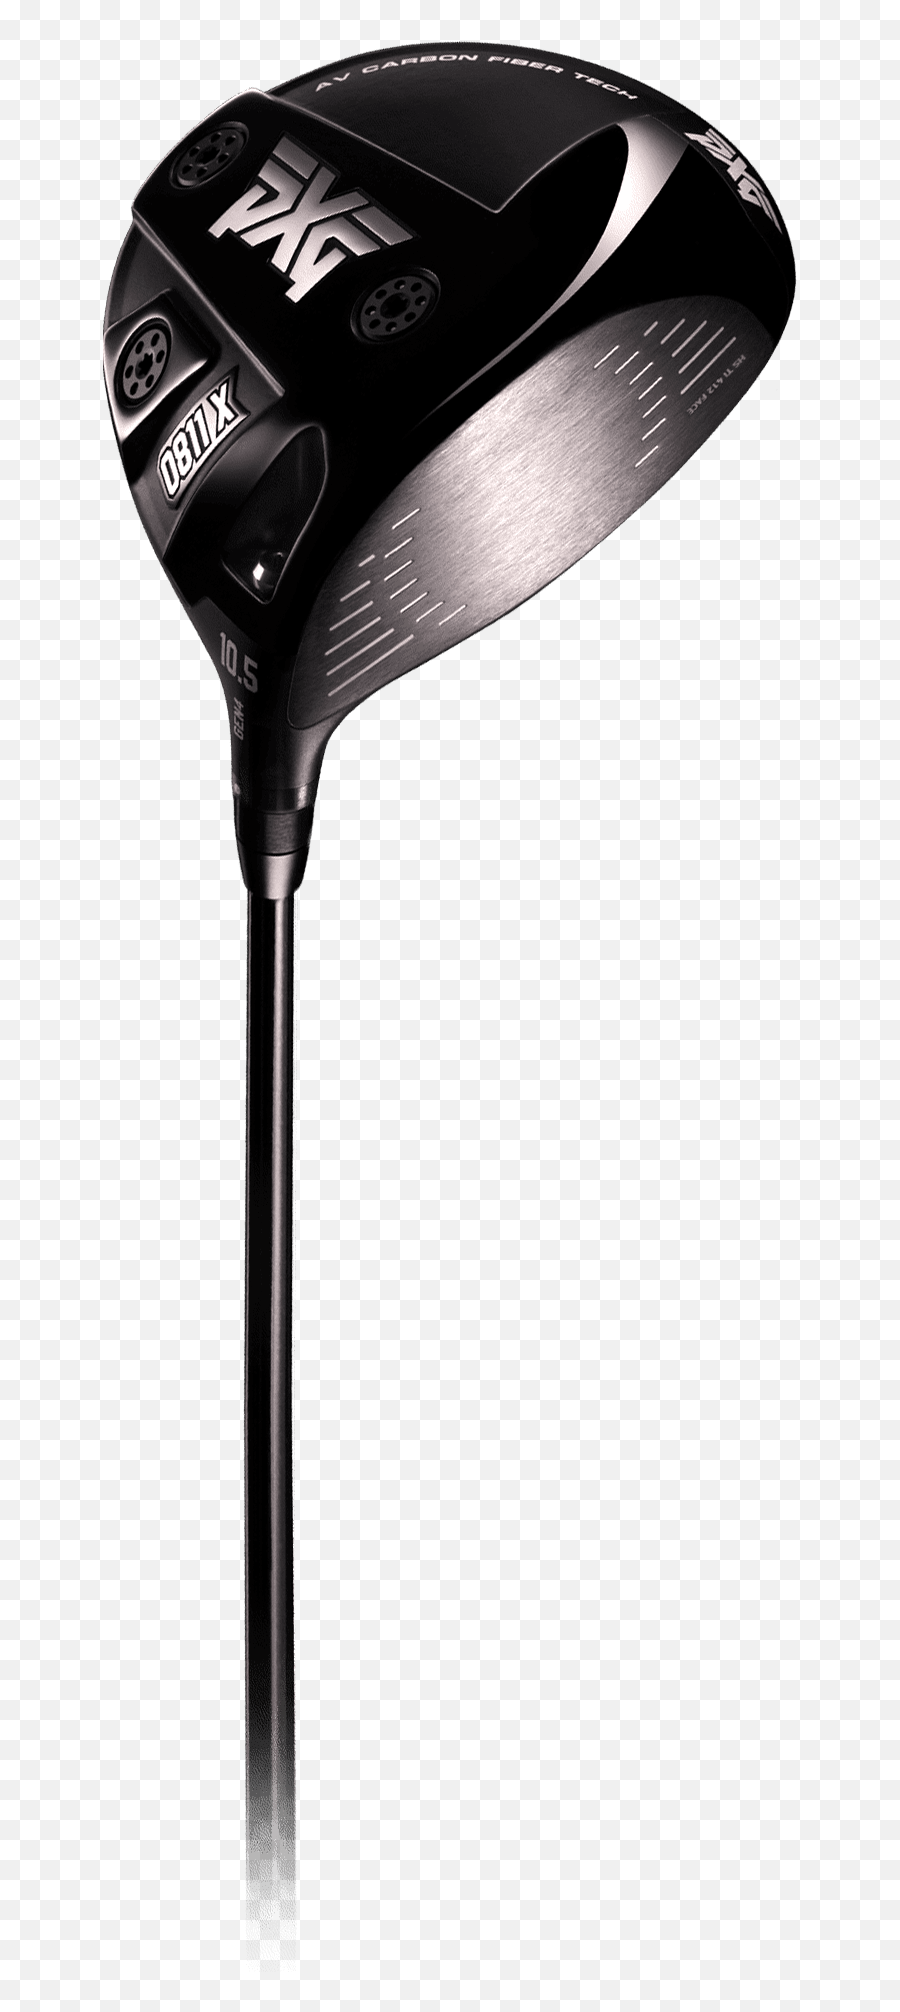 Pxg - Parsons Xtreme Golf Clubs Unlike Any Other Lob Wedge Png,Golf Icon Crossed Clubs